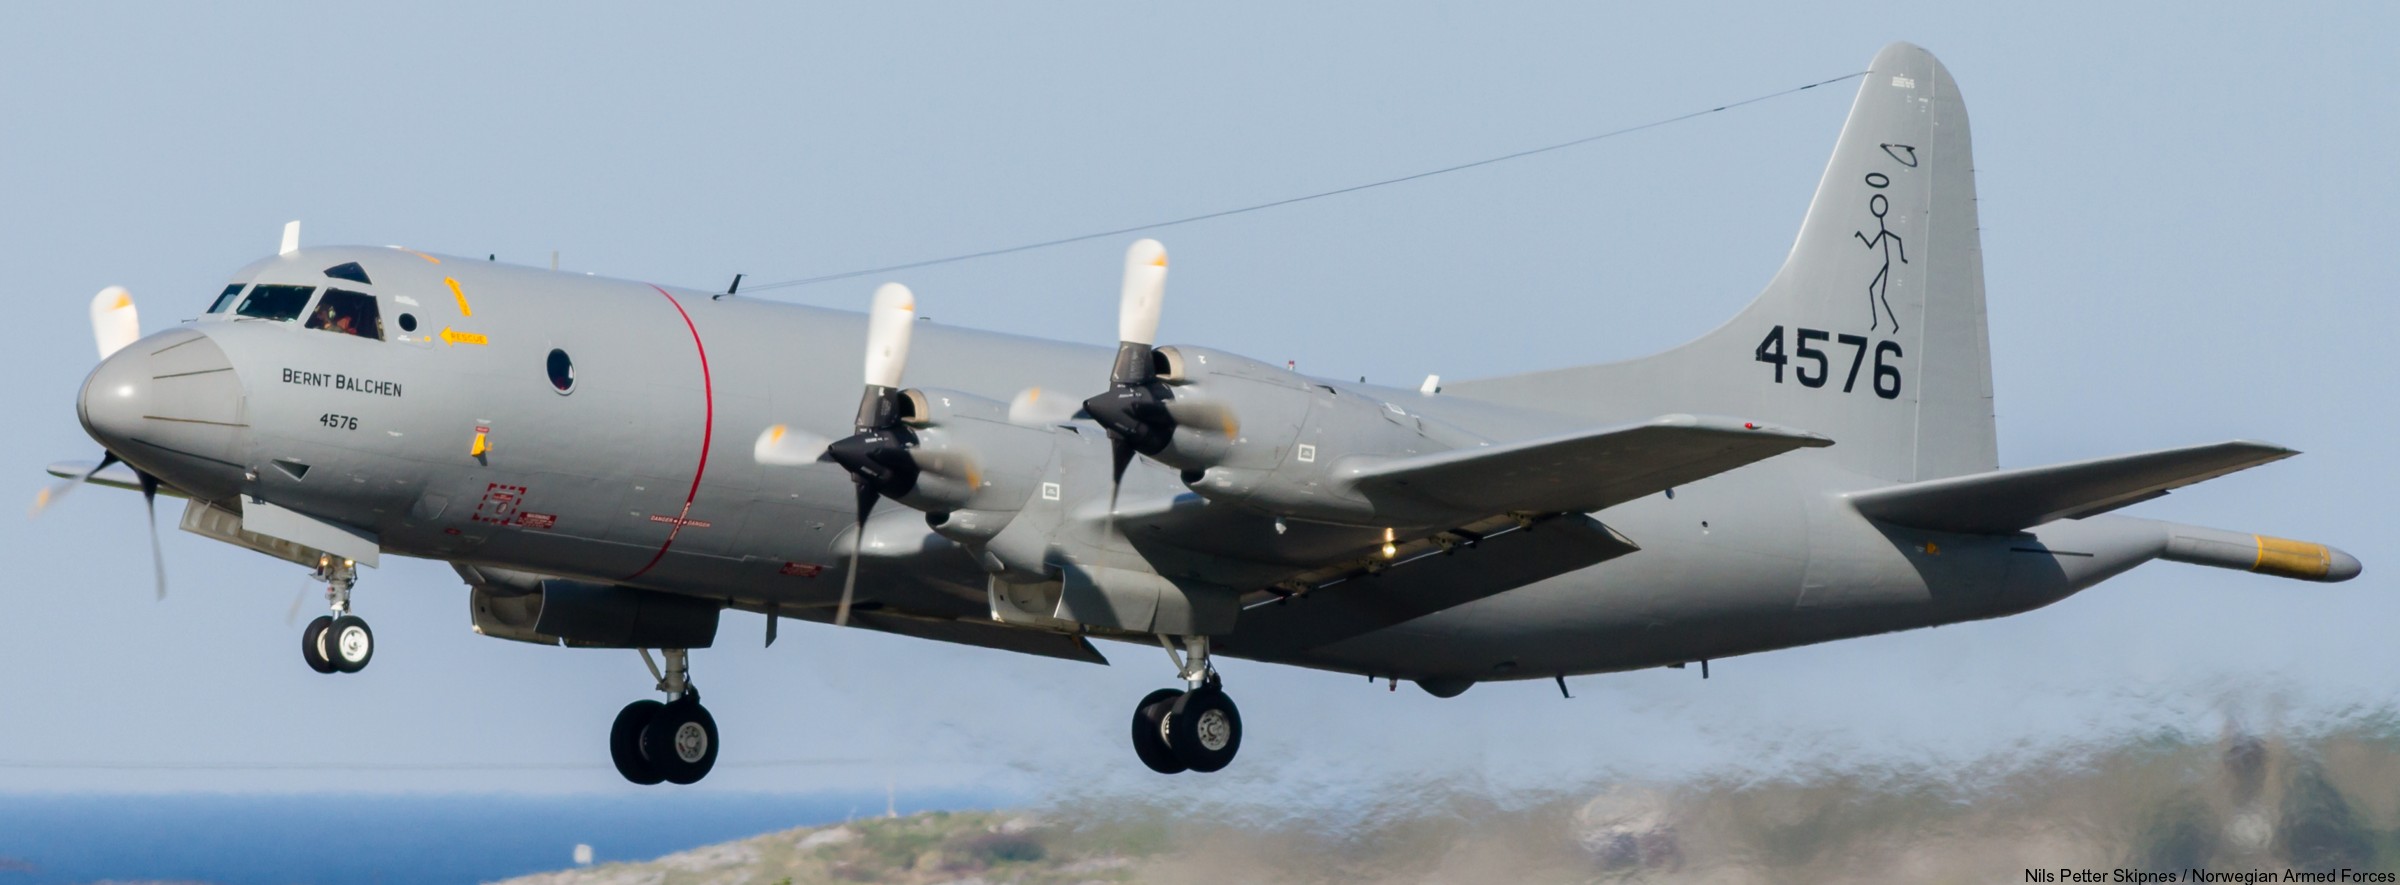 P-3N-Orion-4576-02